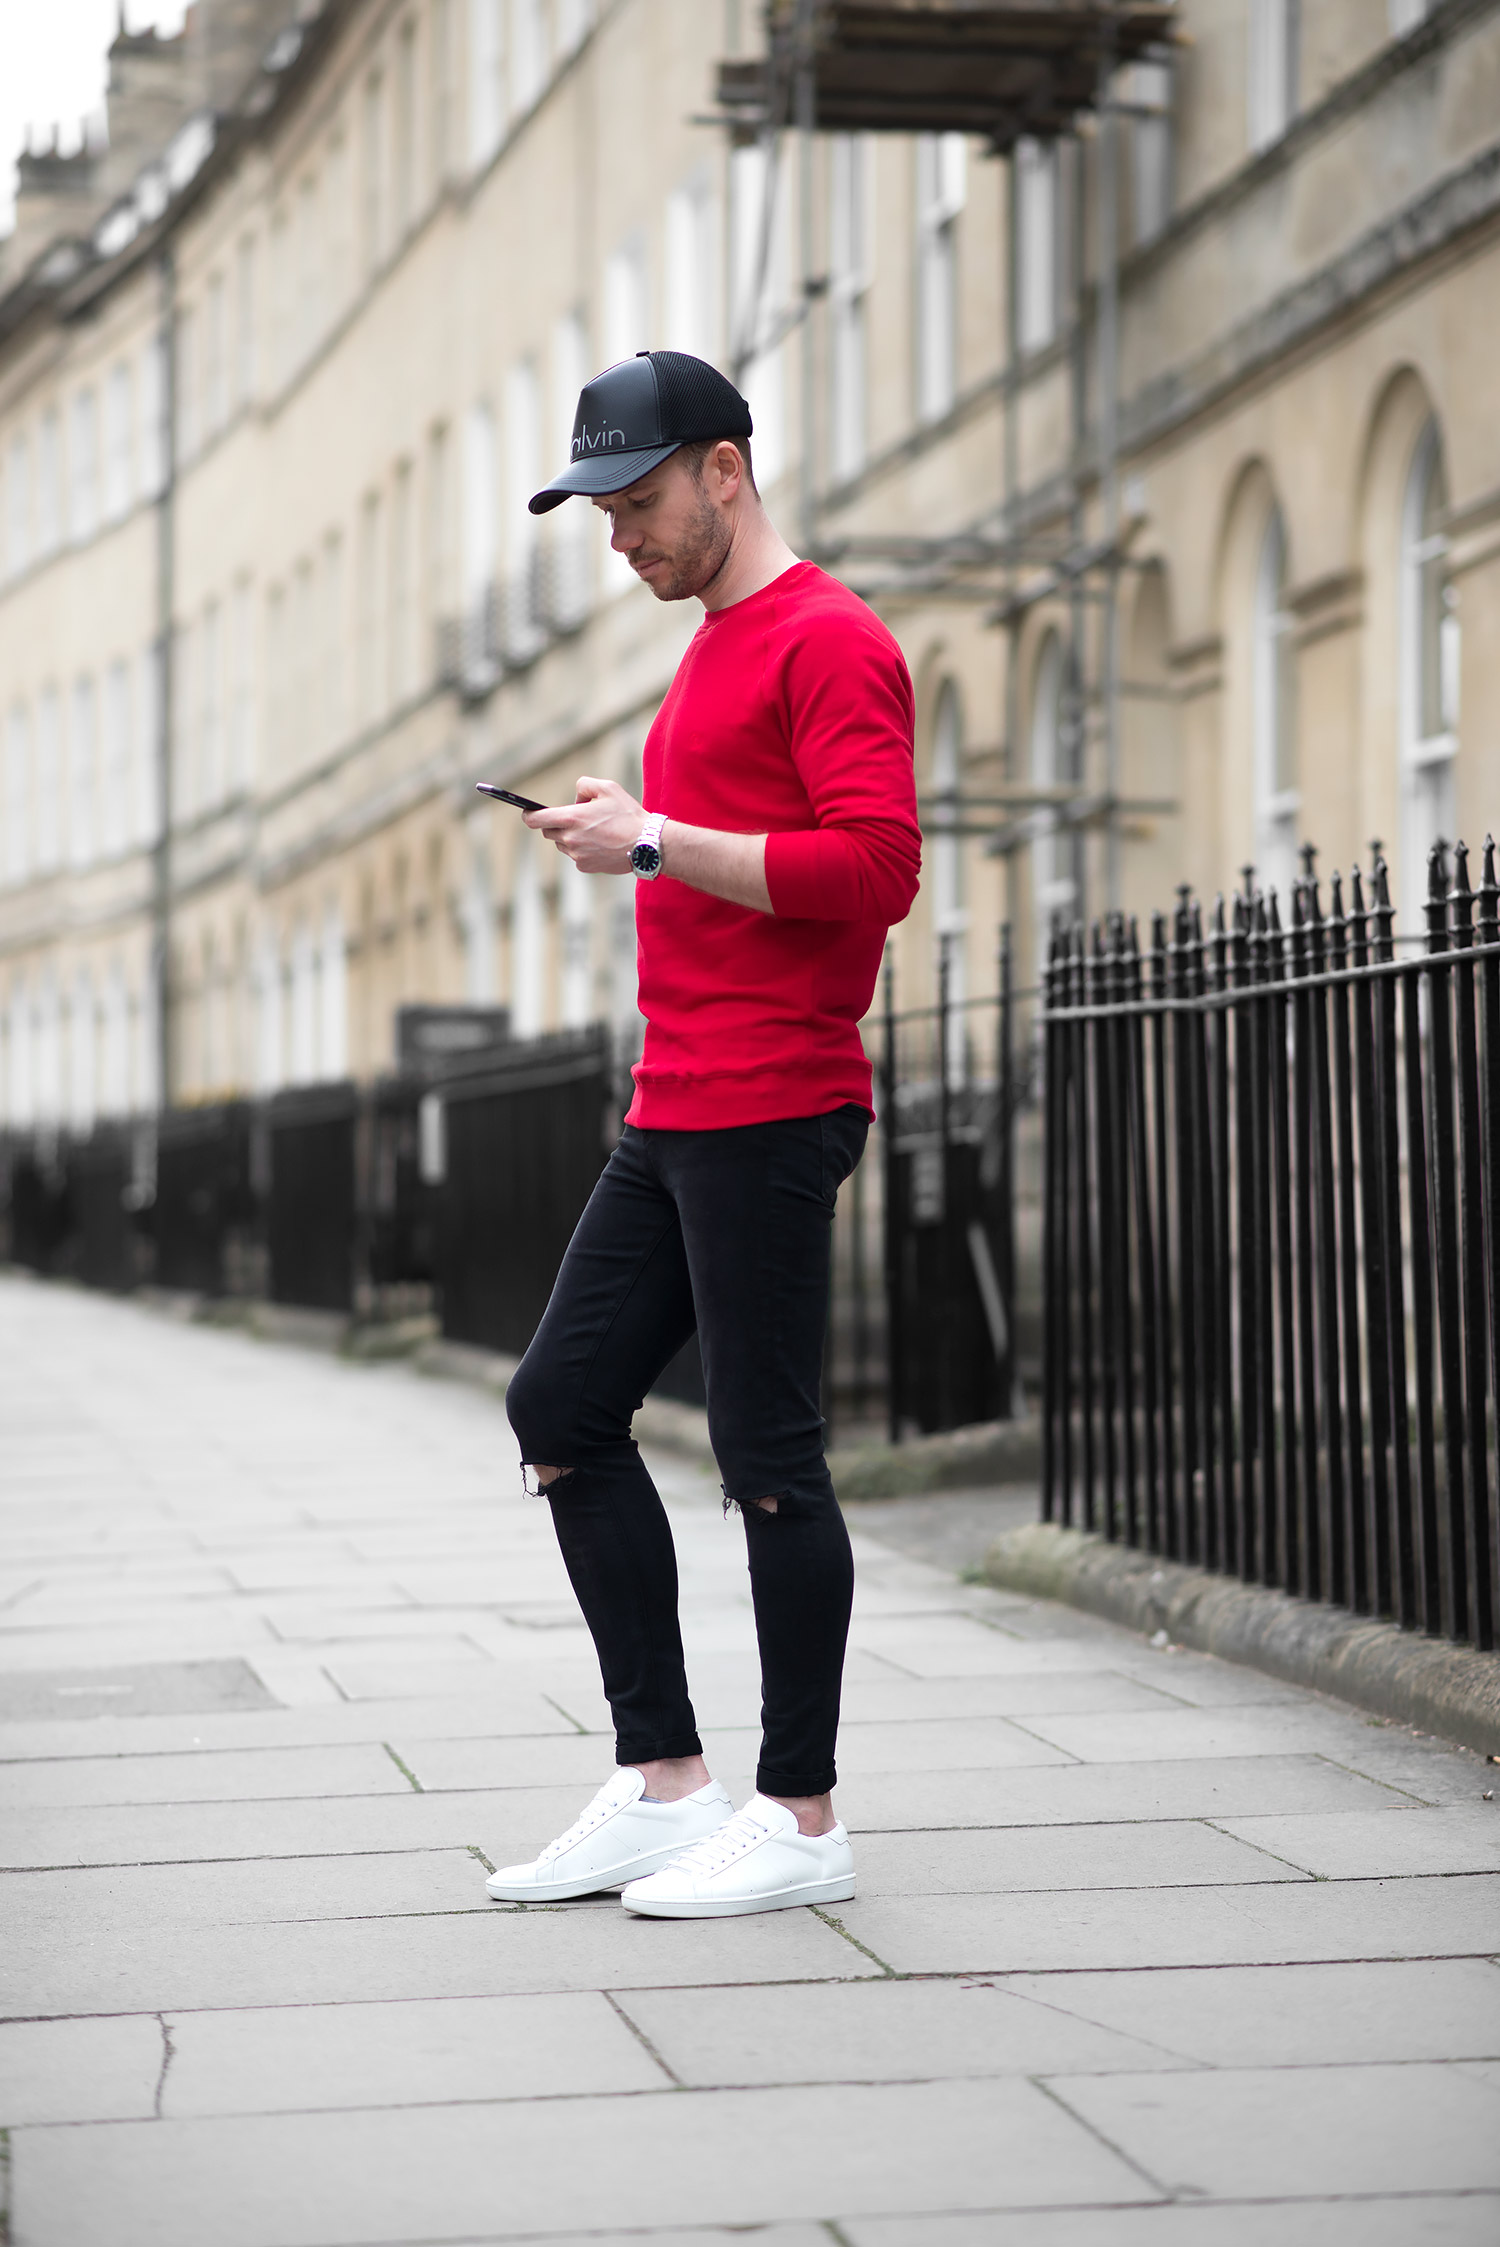 red and black outfit men's